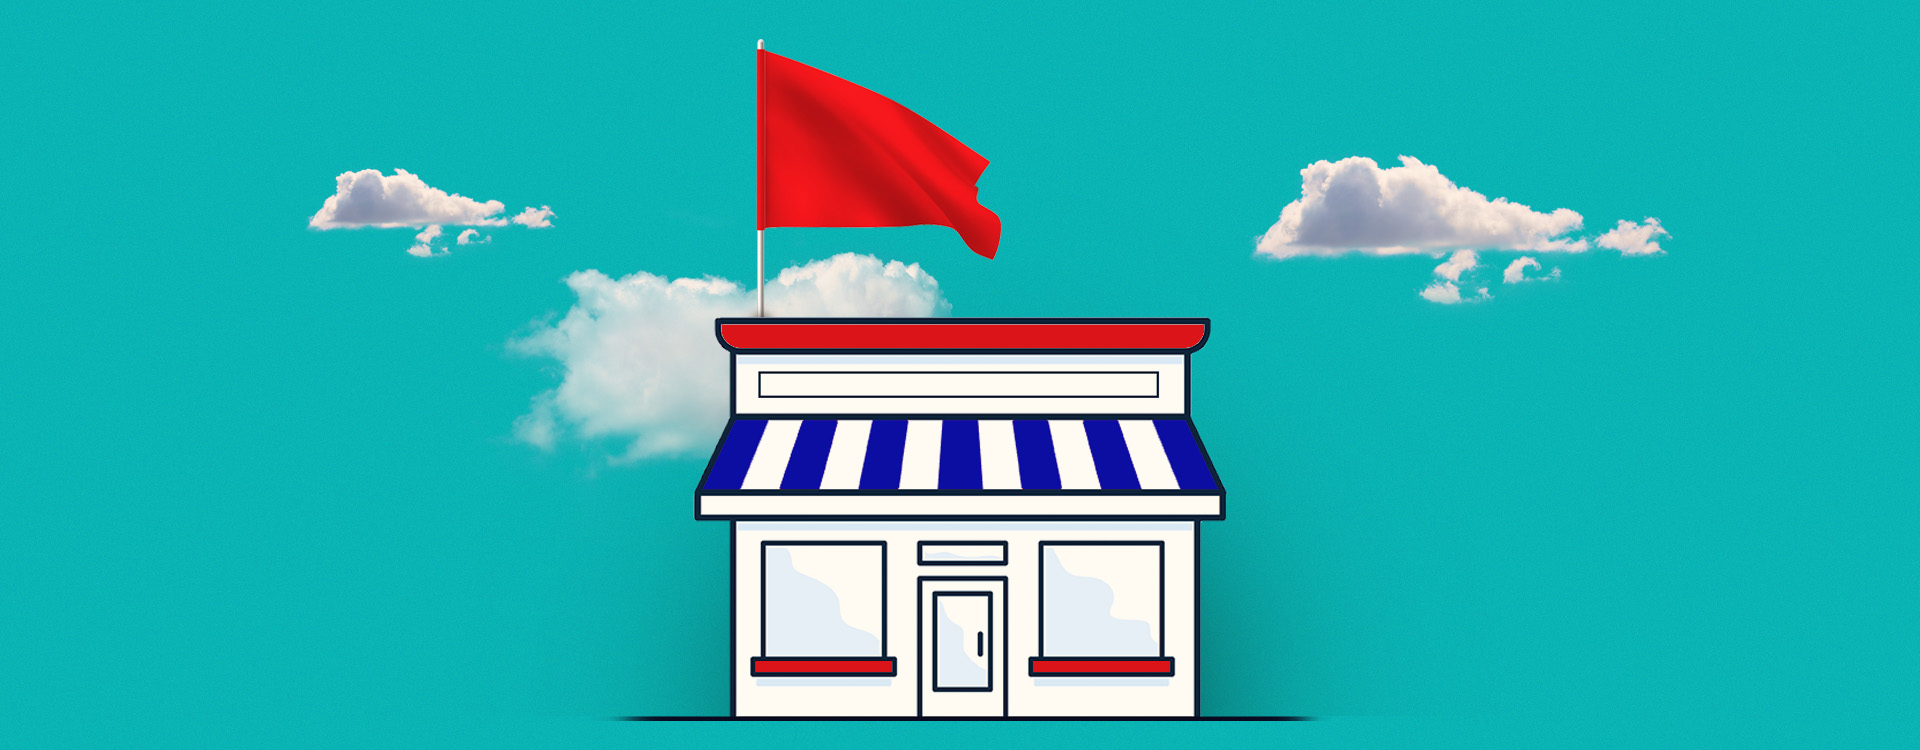 Small businesses should identify red flags before closing.